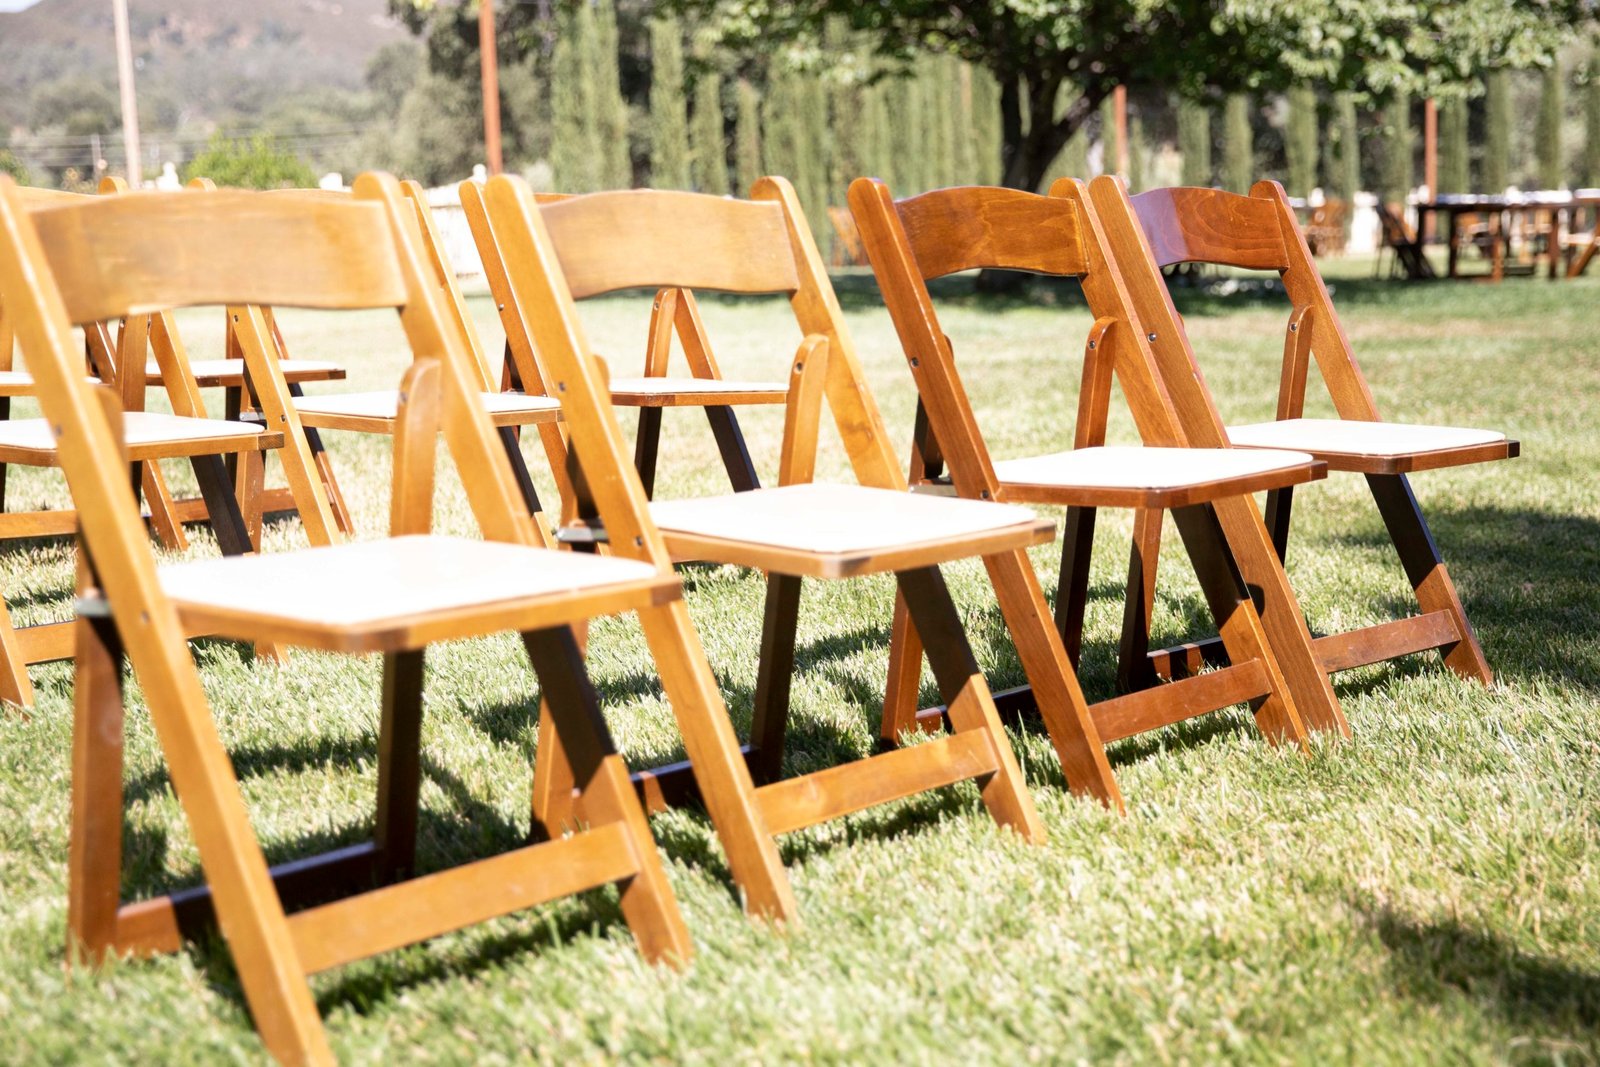 chairs lined up for a wedding ceremony